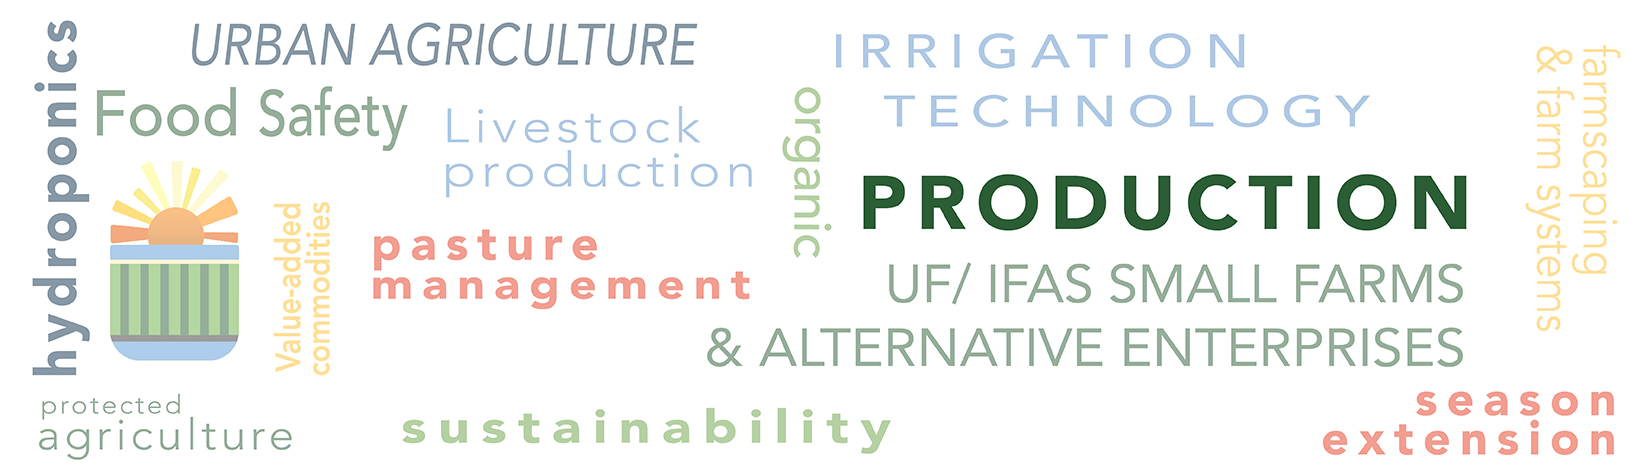 banner displaying the word production surrounded by Urban Agriculture, Irrigation, Technoogy, integrated pest management, business and marketing, hydroponics, food safety, protected agriculture, rergulation and policy, economic impact, livestock production, season extension, sustainability, pasture management, farmscaping and farm systems, postharvest handling, aquaponics